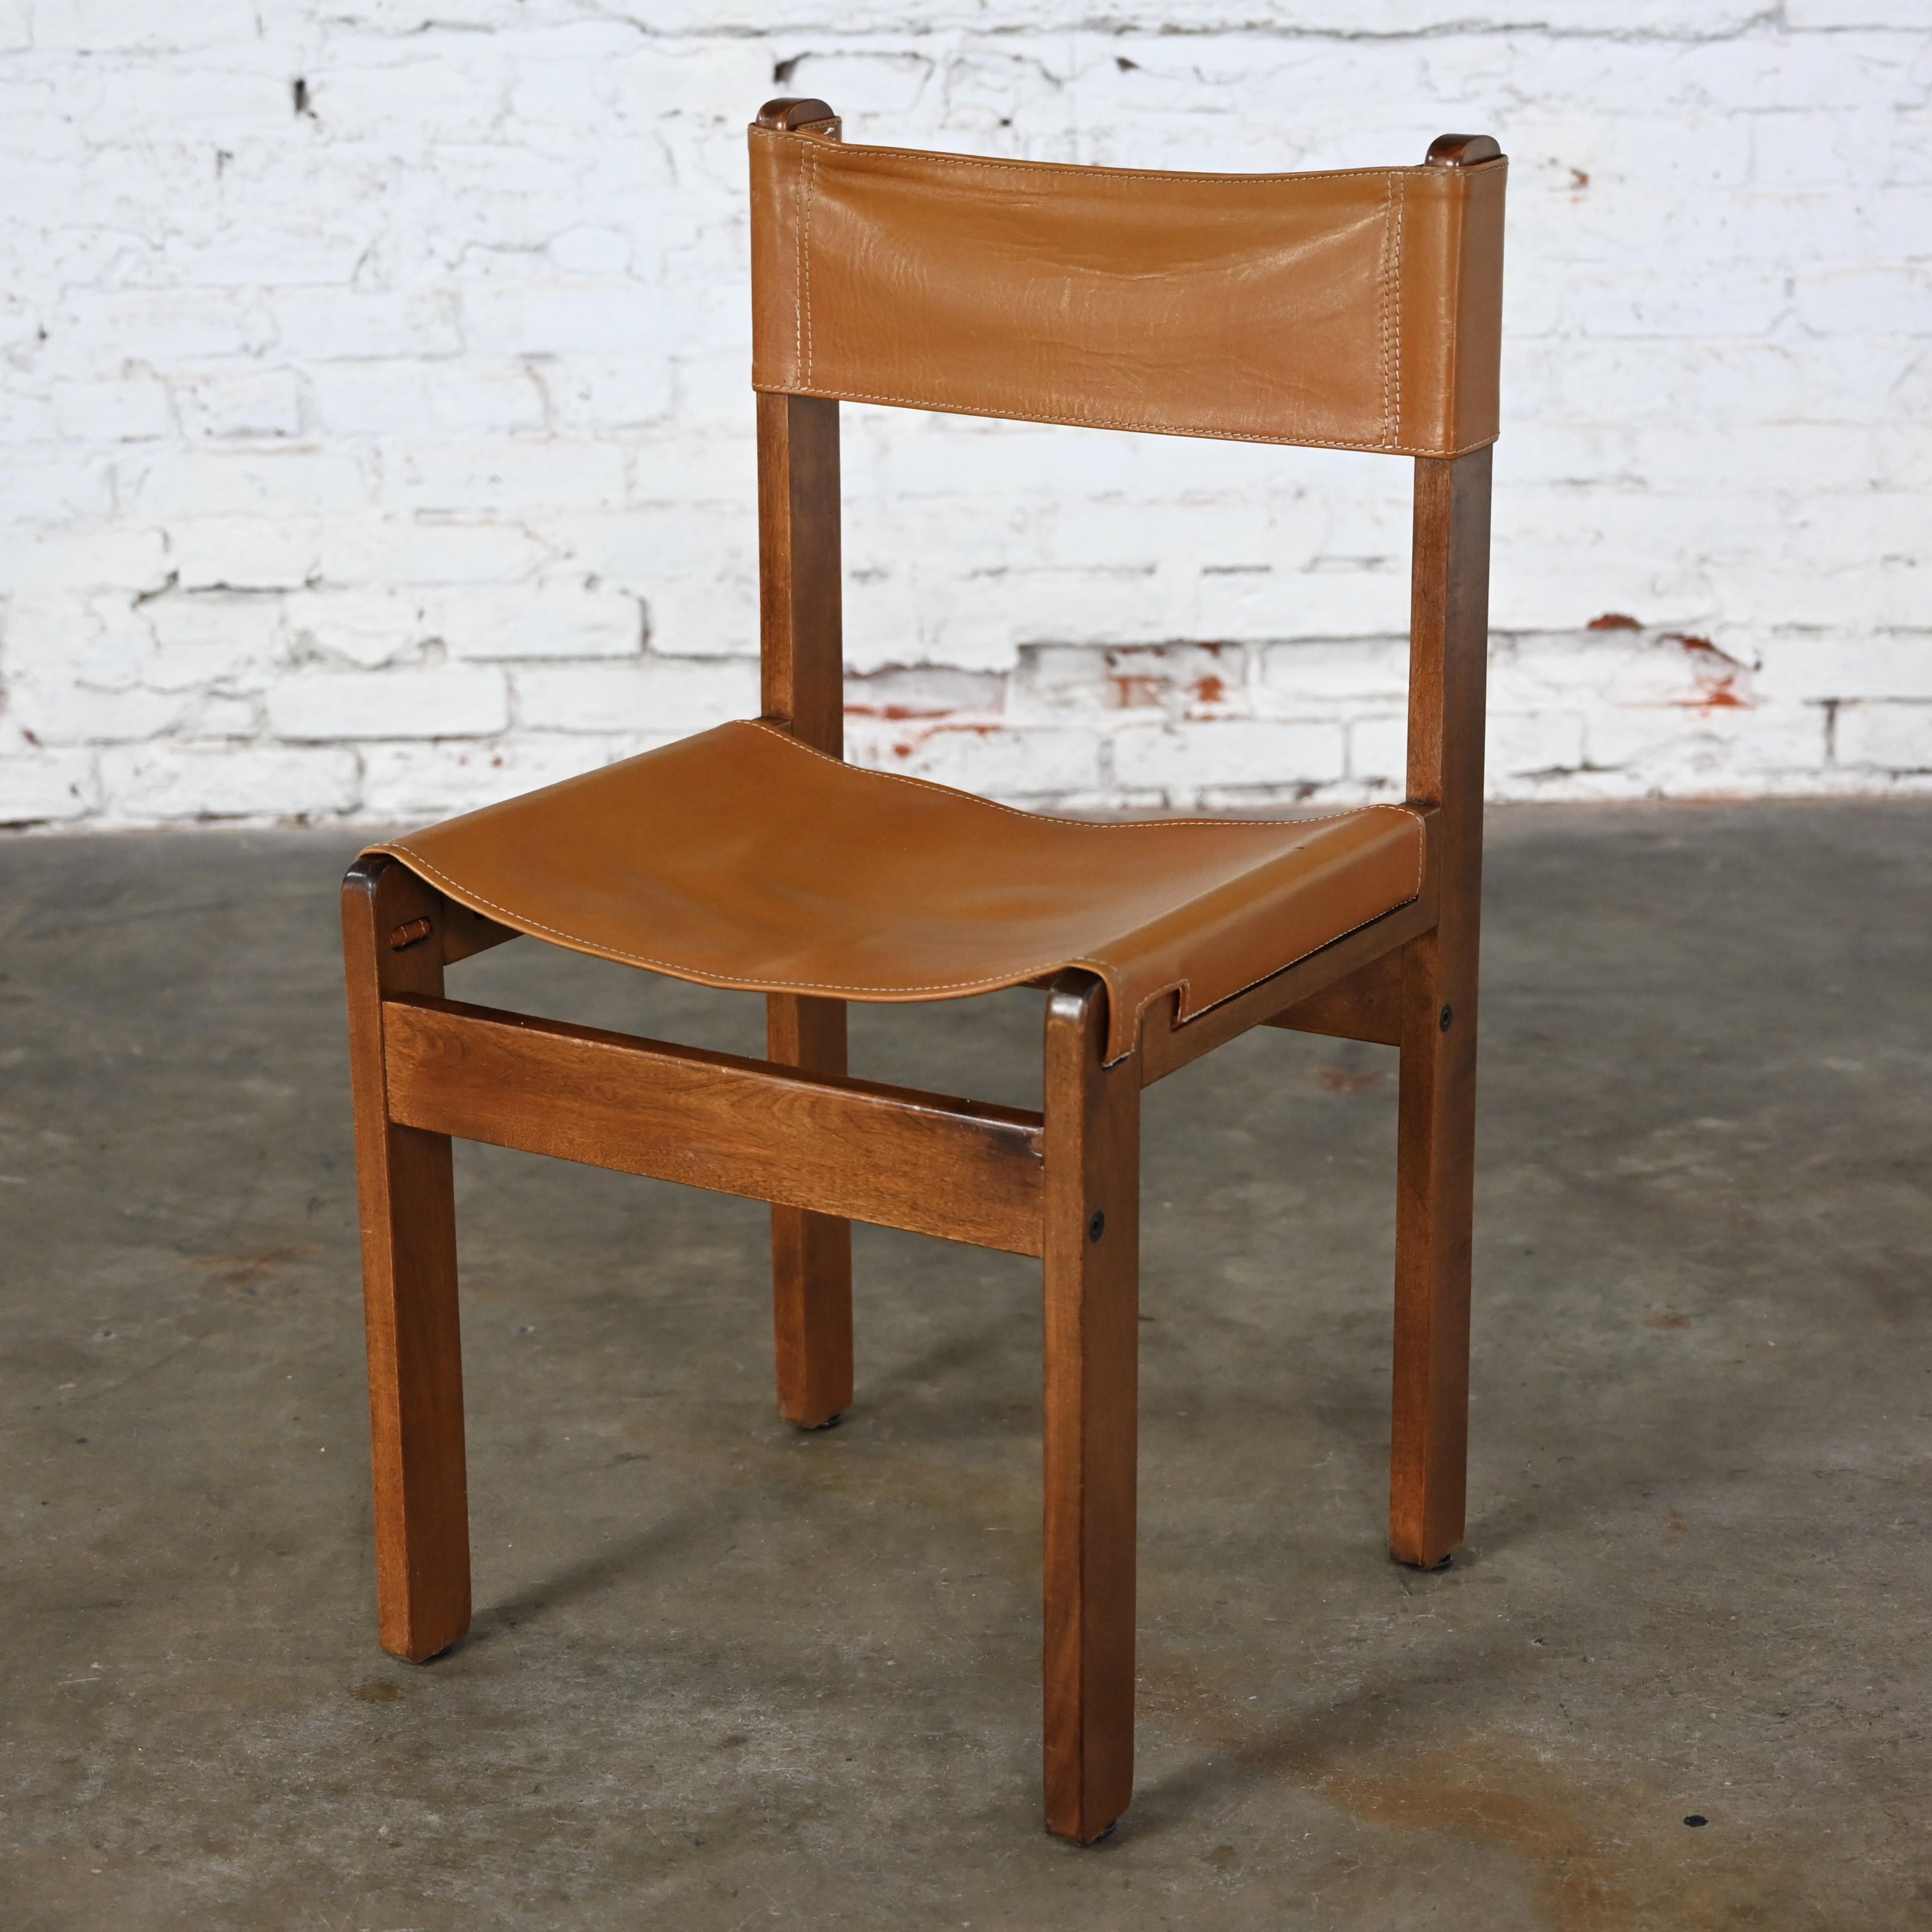 1970’s Modern Sling Chair Teak & Leather Style Michel Arnoult Made in Argentina For Sale 3